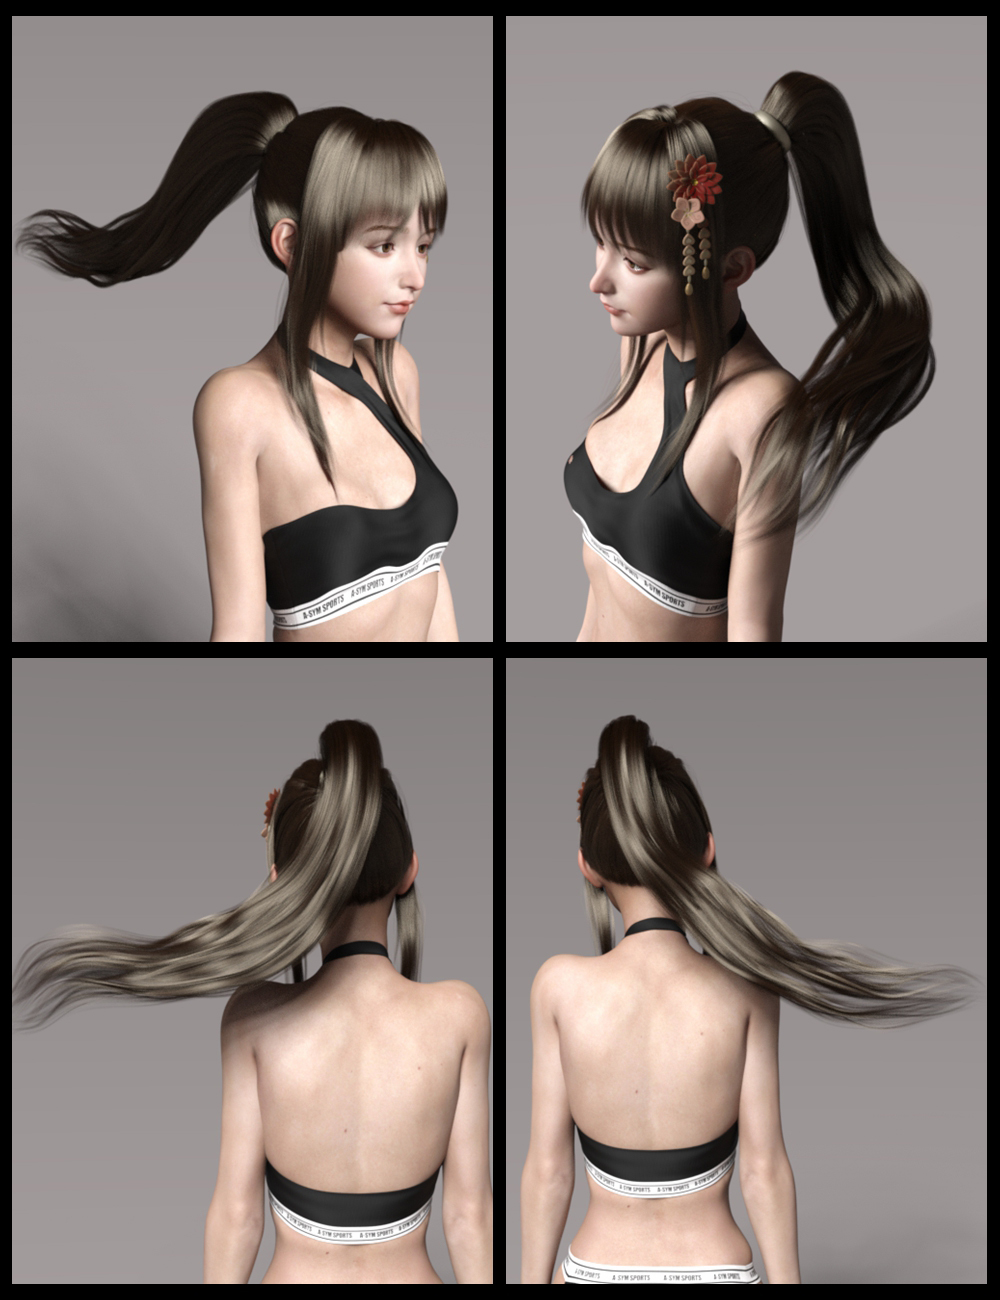 Qiunr Hair for Genesis 8 and 8.1 Females by: Ergou, 3D Models by Daz 3D